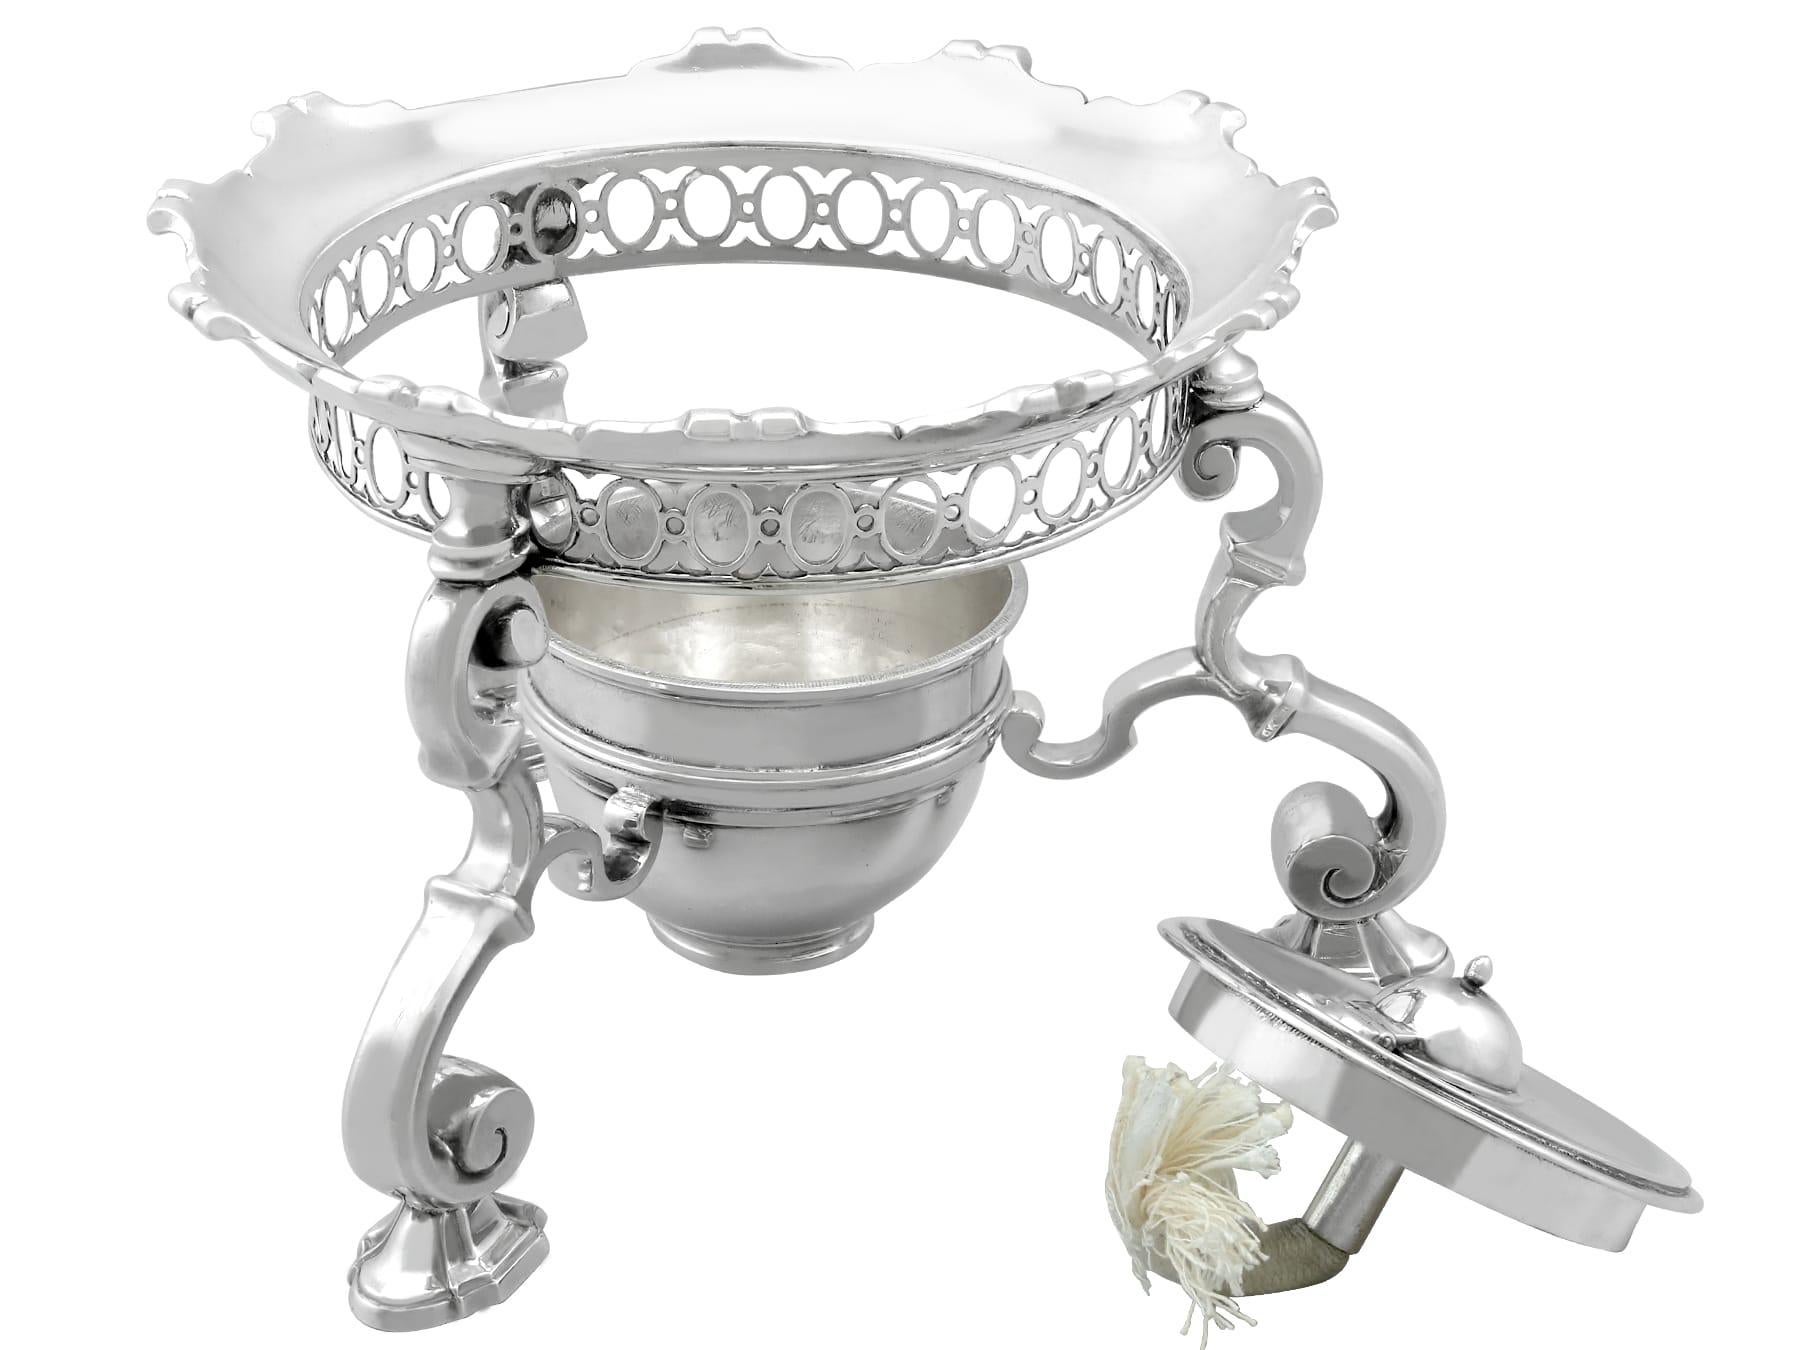 Sterling Silver Spirit Kettle by Charles Hatfield - Antique George II (1728) For Sale 2